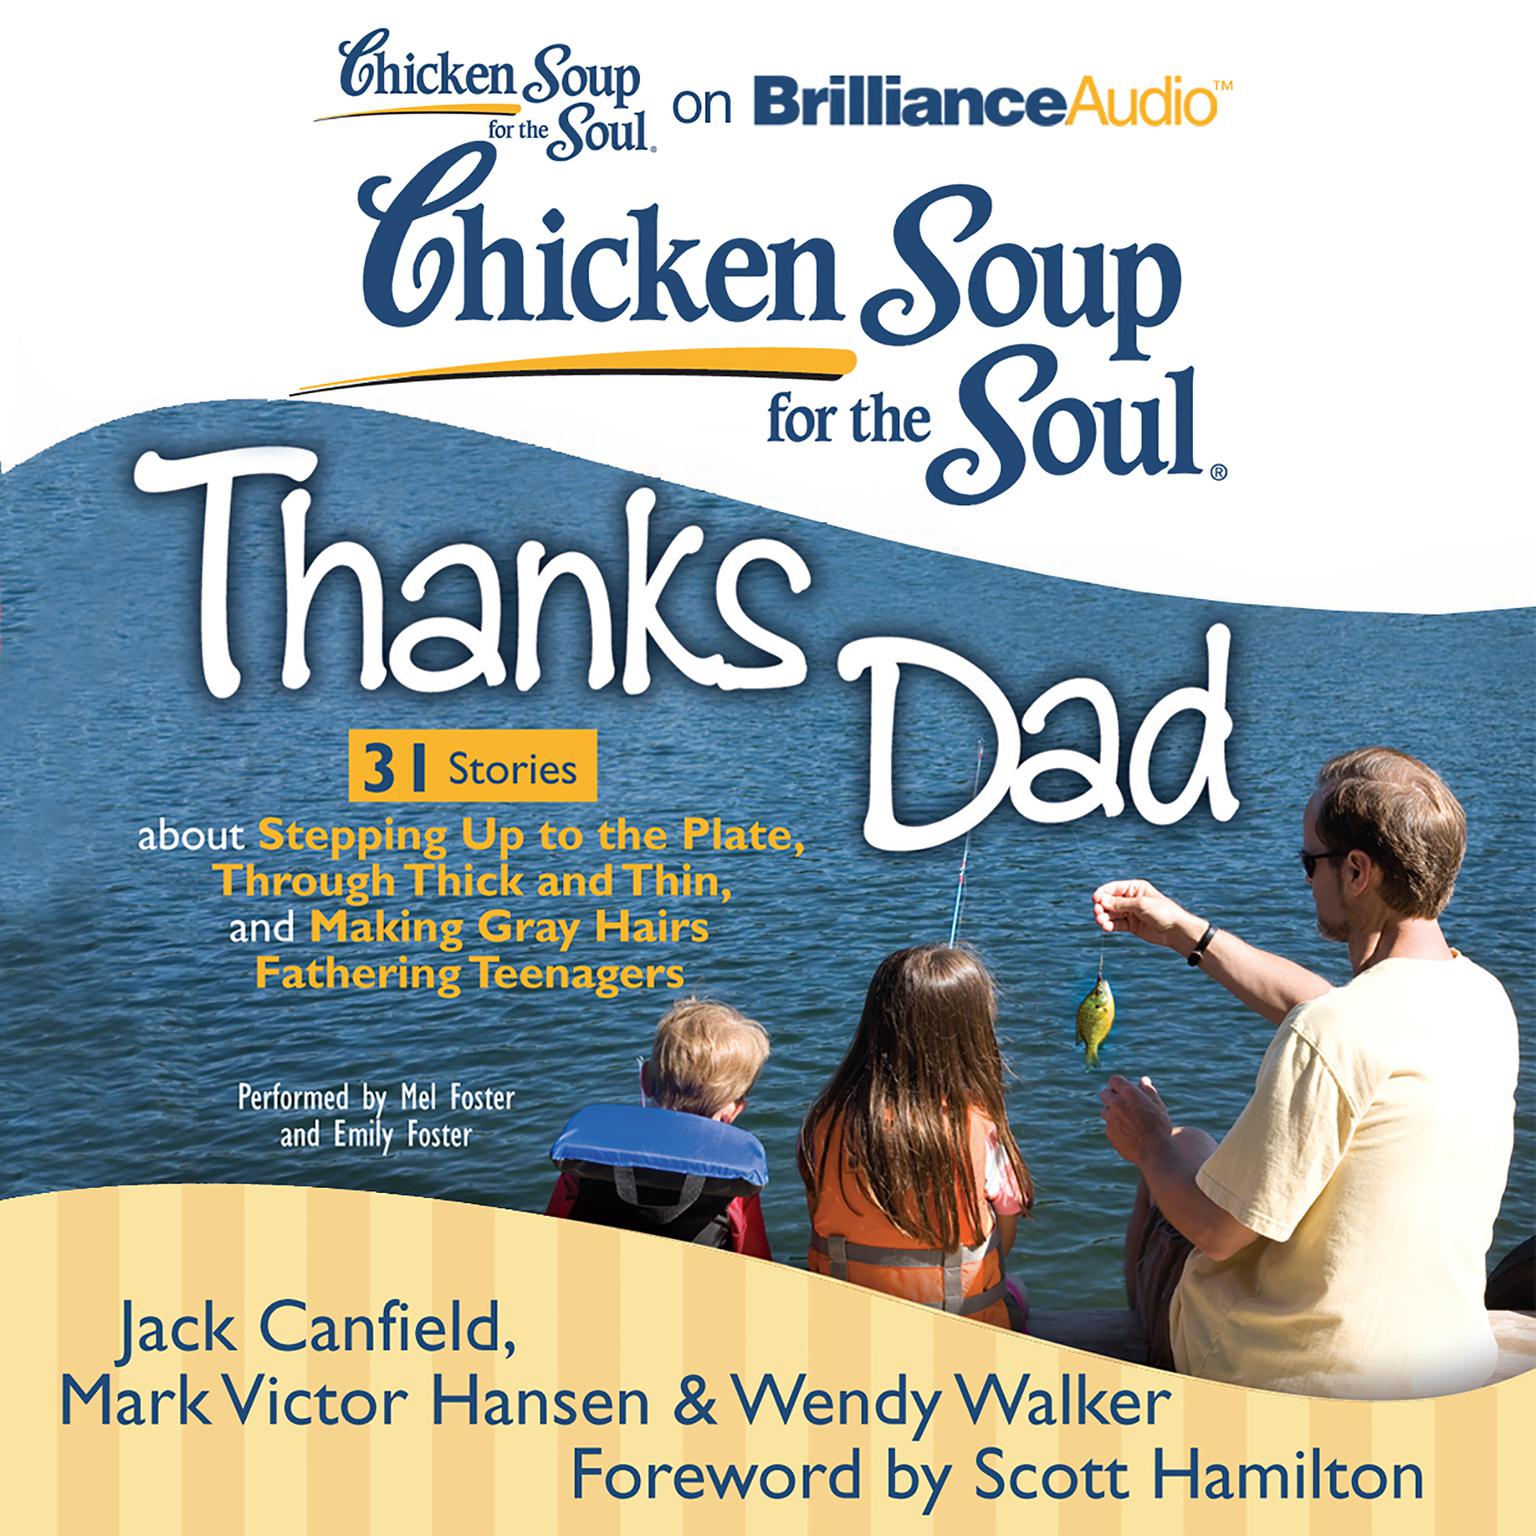 Chicken Soup for the Soul: Thanks Dad - 31 Stories about Stepping Up to the Plate, Through Thick and Thin, and Making Gray Hairs Fathering Teenagers Audiobook, by Jack Canfield